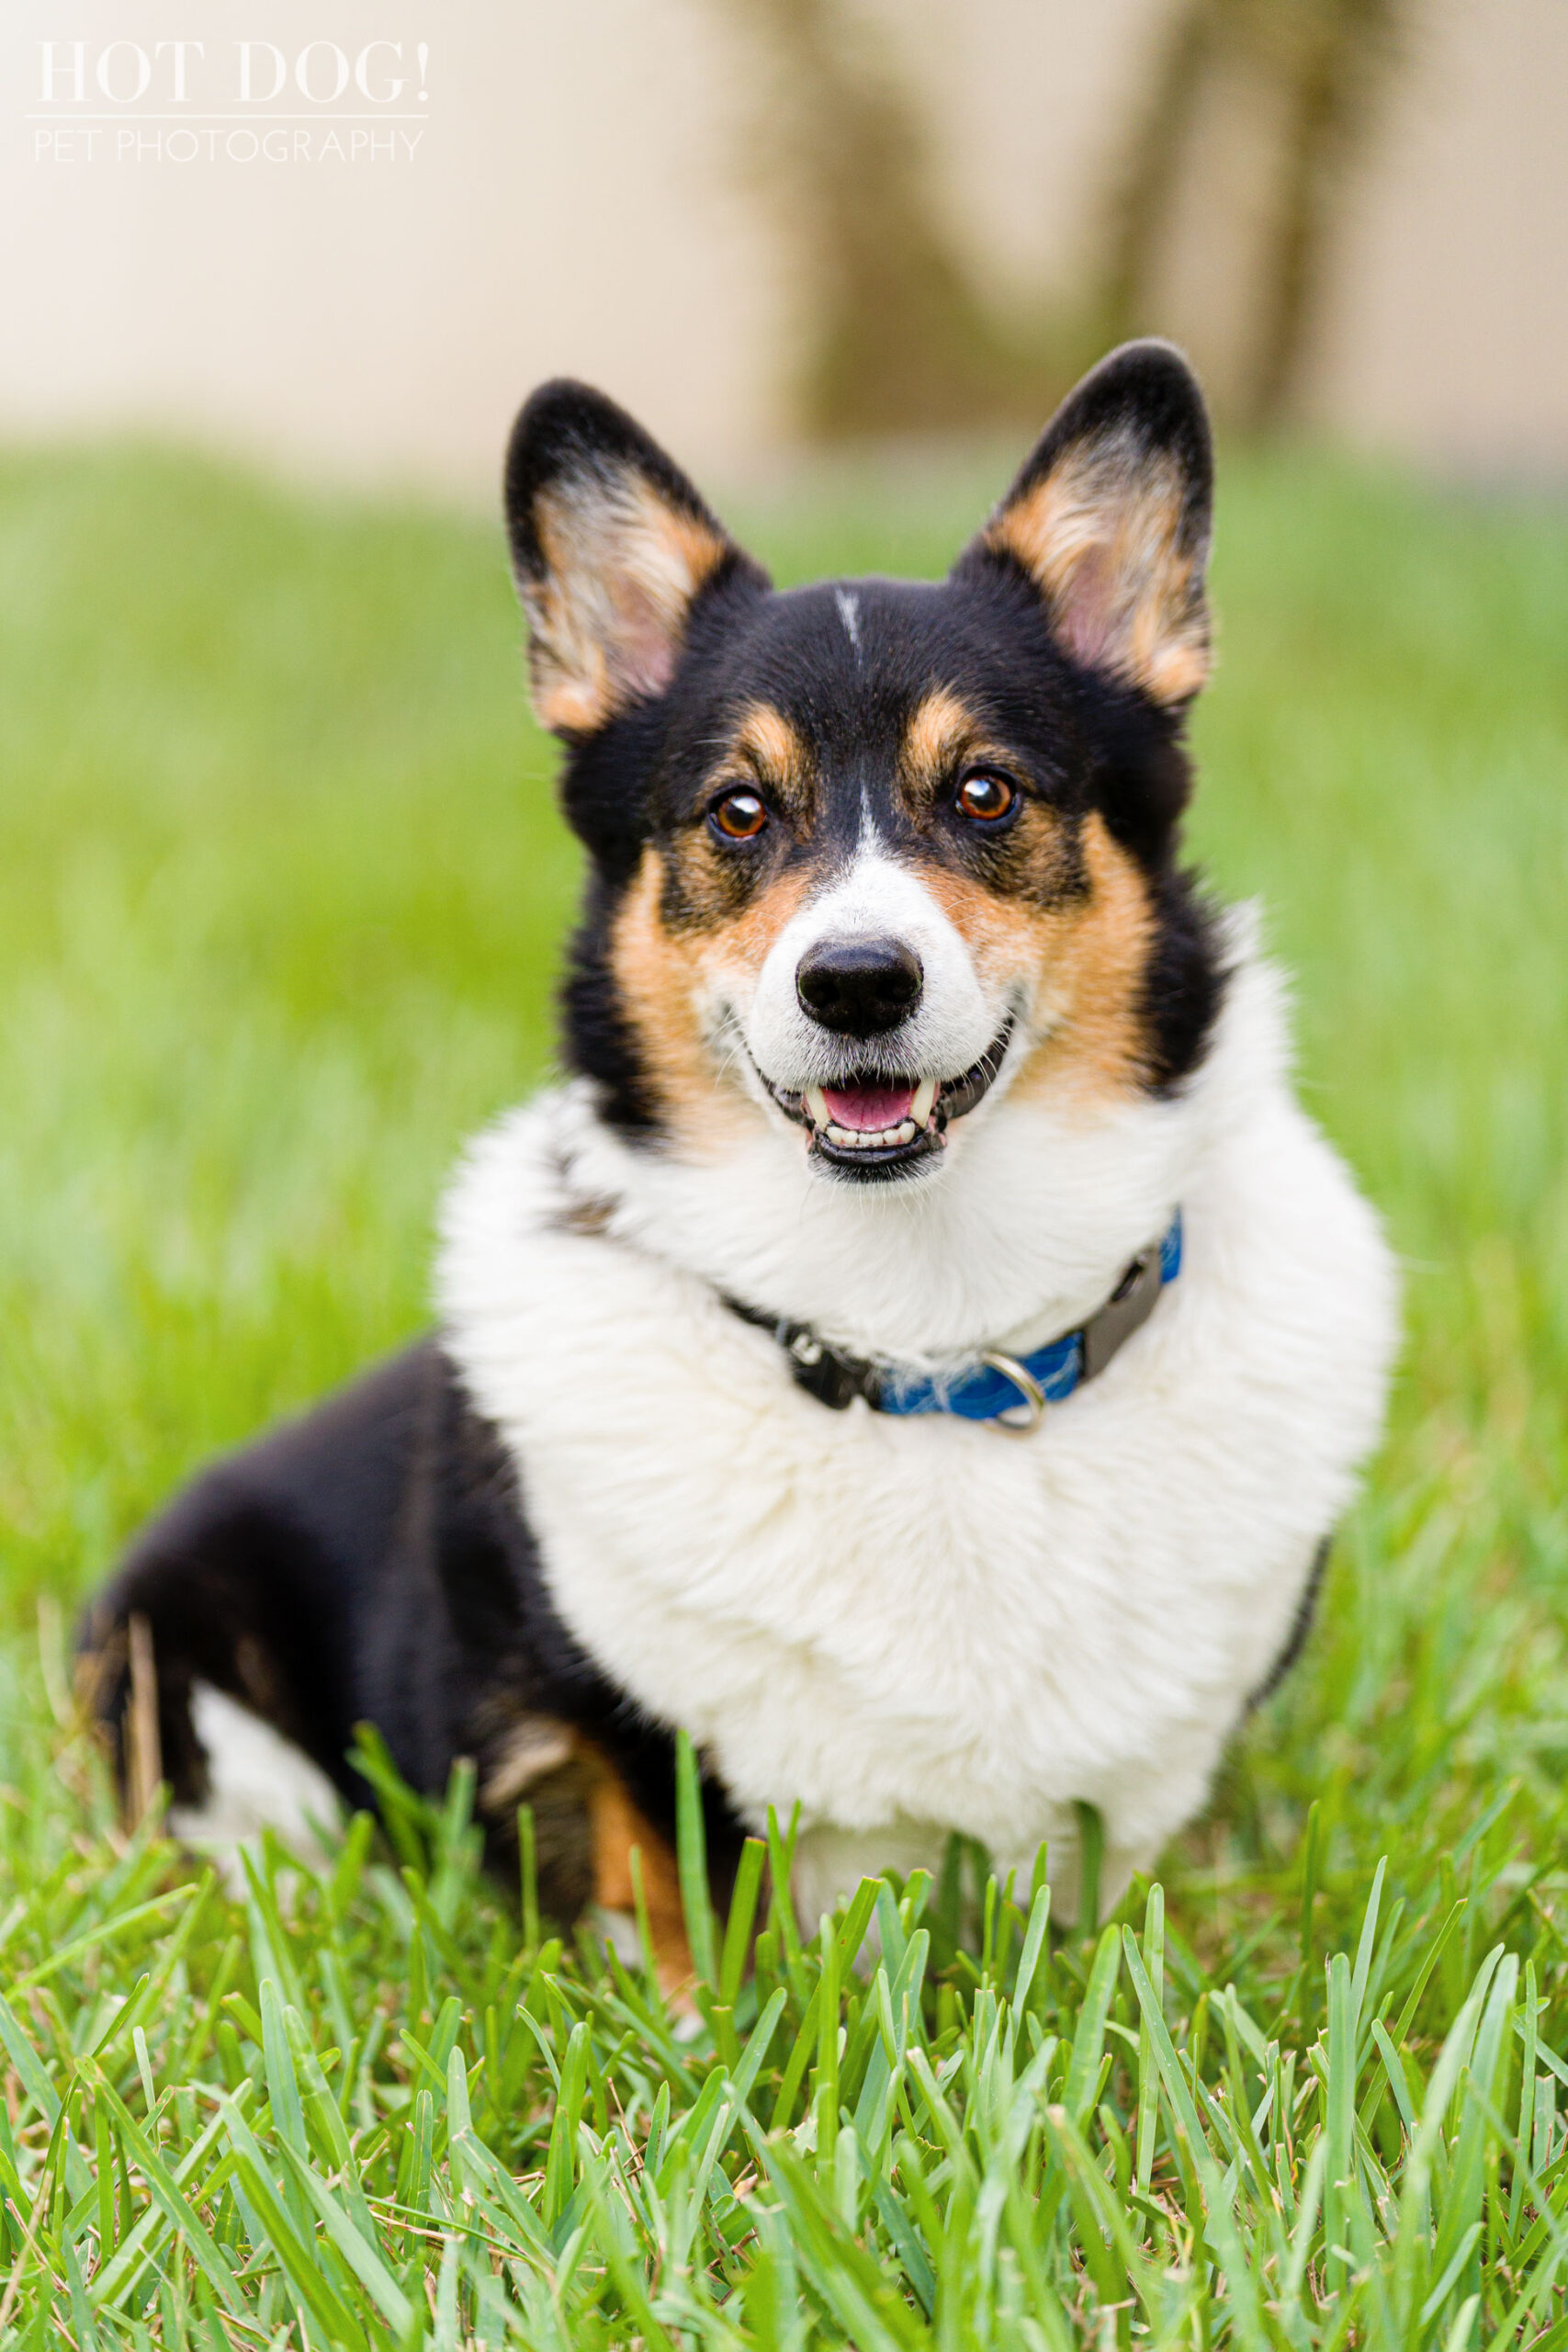 Hot Dog! Pet Photography creates stunning photos of Pembroke Welsh Corgi Snap in this professional pet photo session.